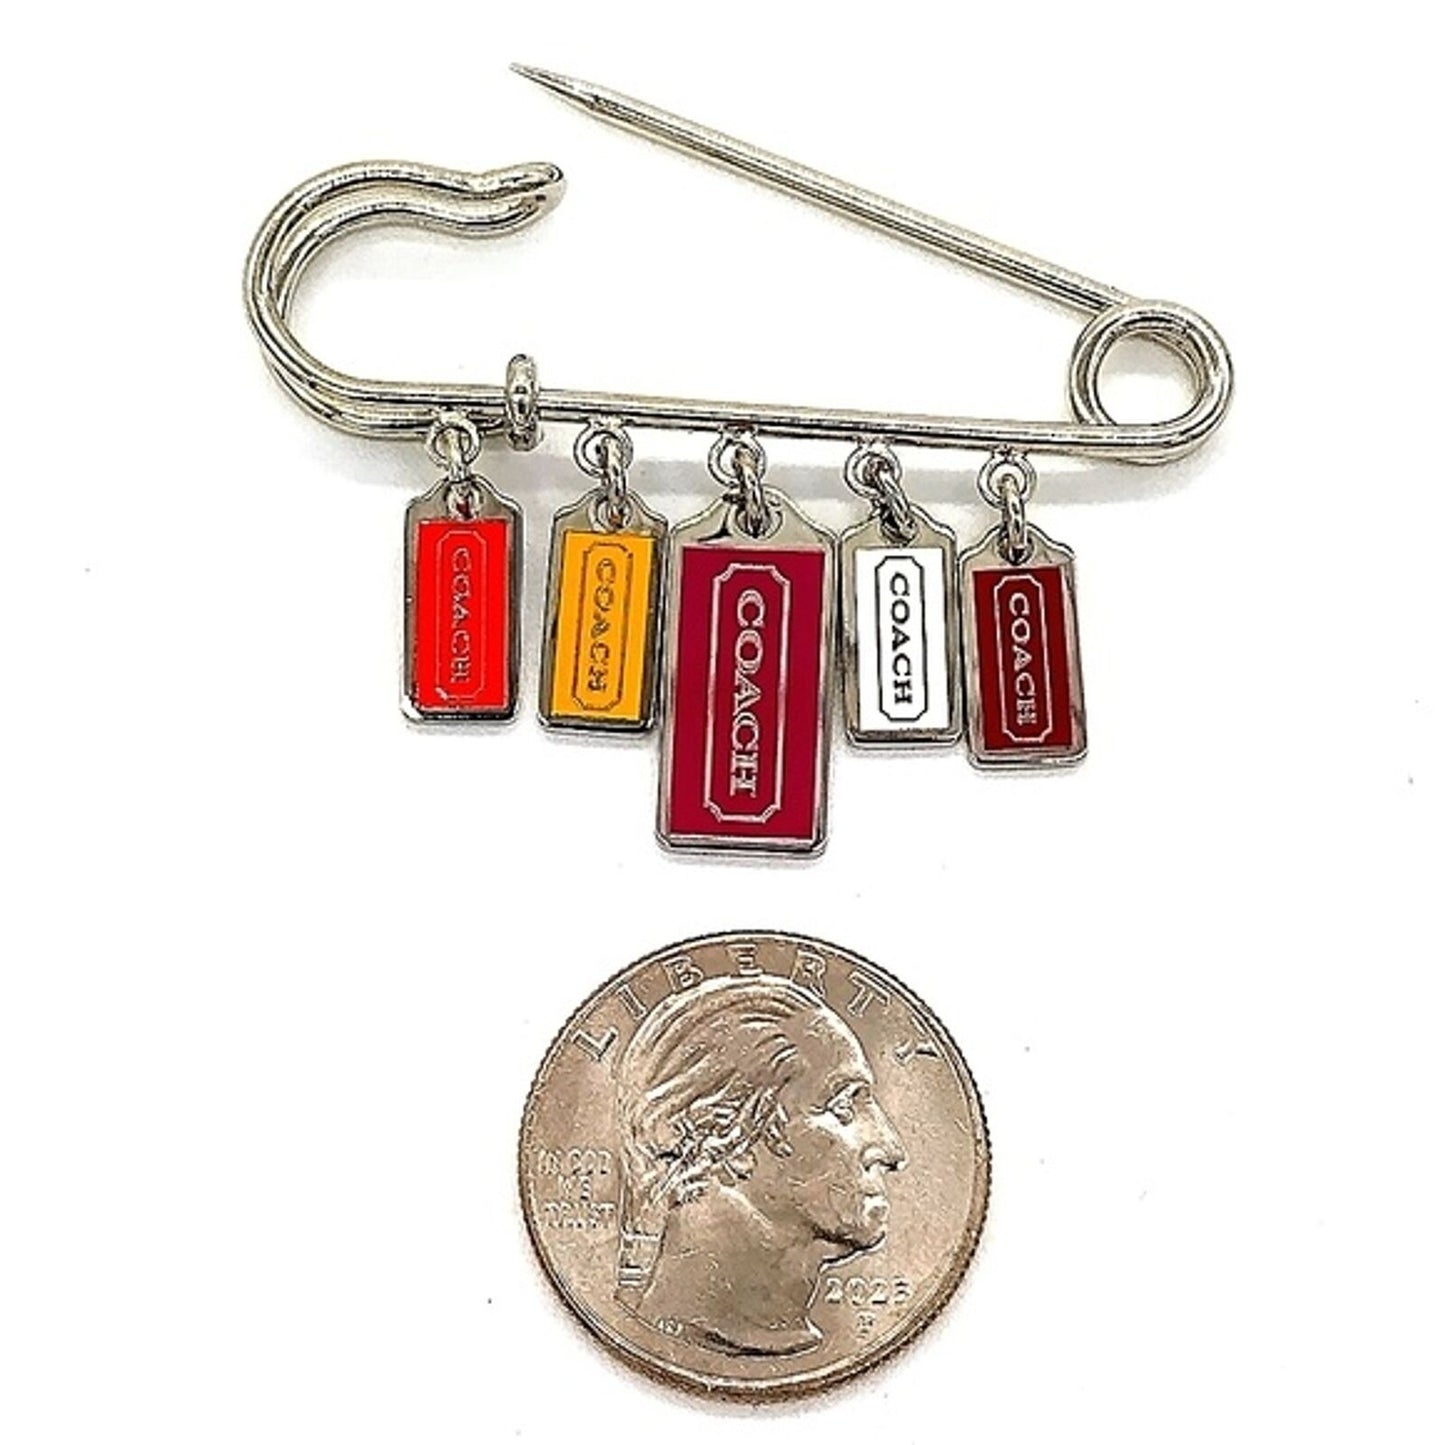 SALE! Vintage COACH Safety Pin Brooch Hangbag Backpack Purse Charm